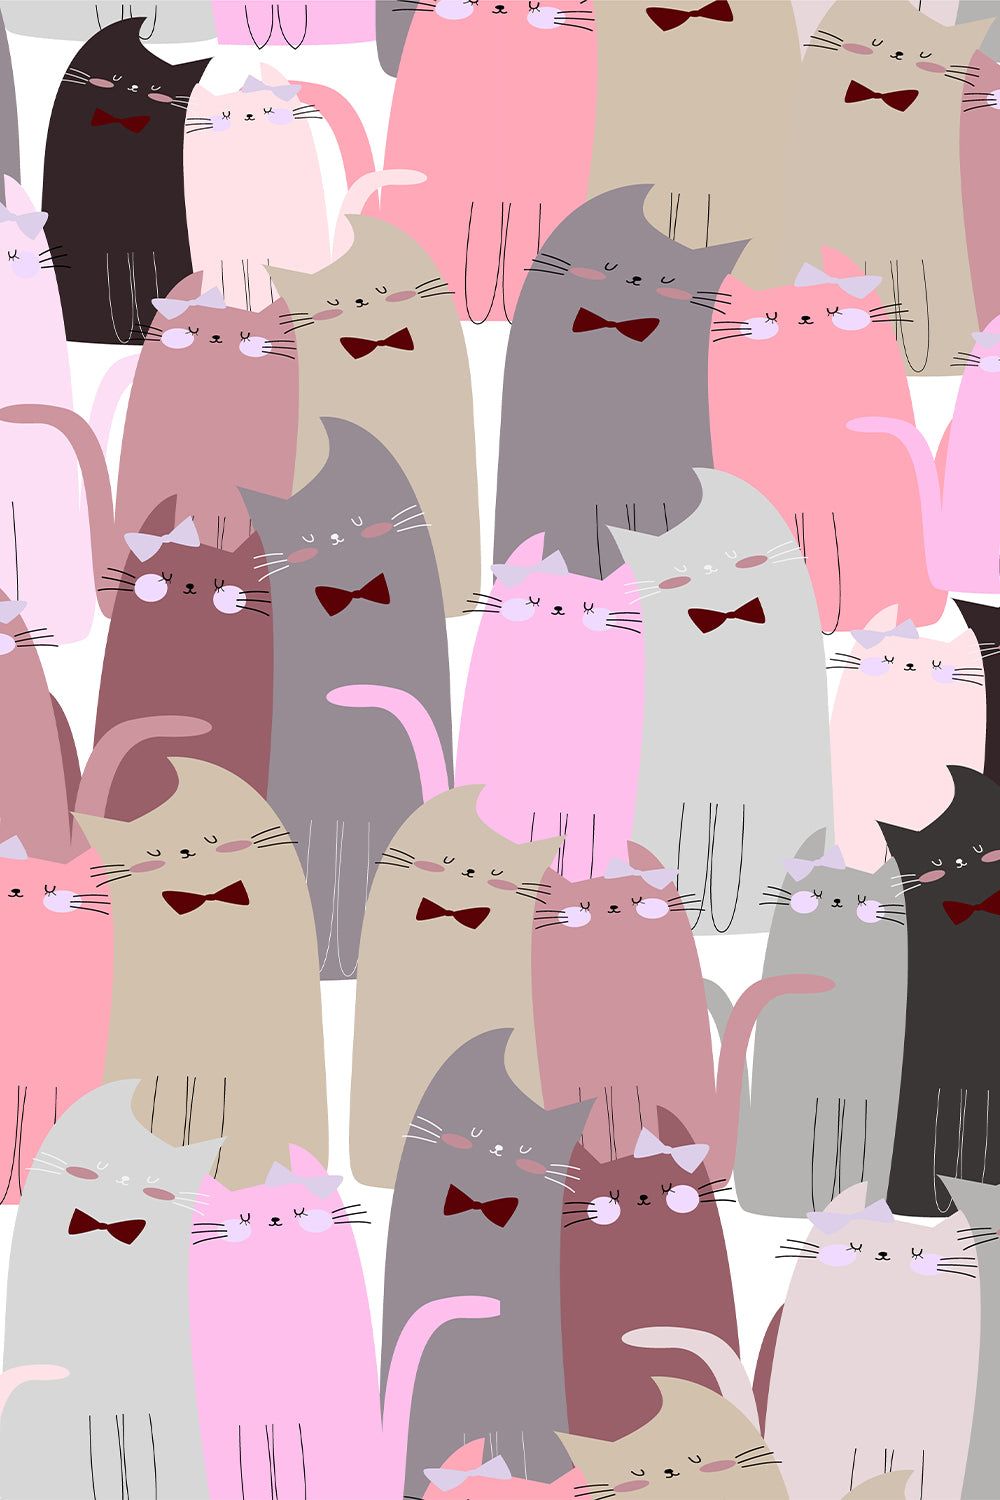 Wallpaper for mobile phone of a lot of cats - Cute pink